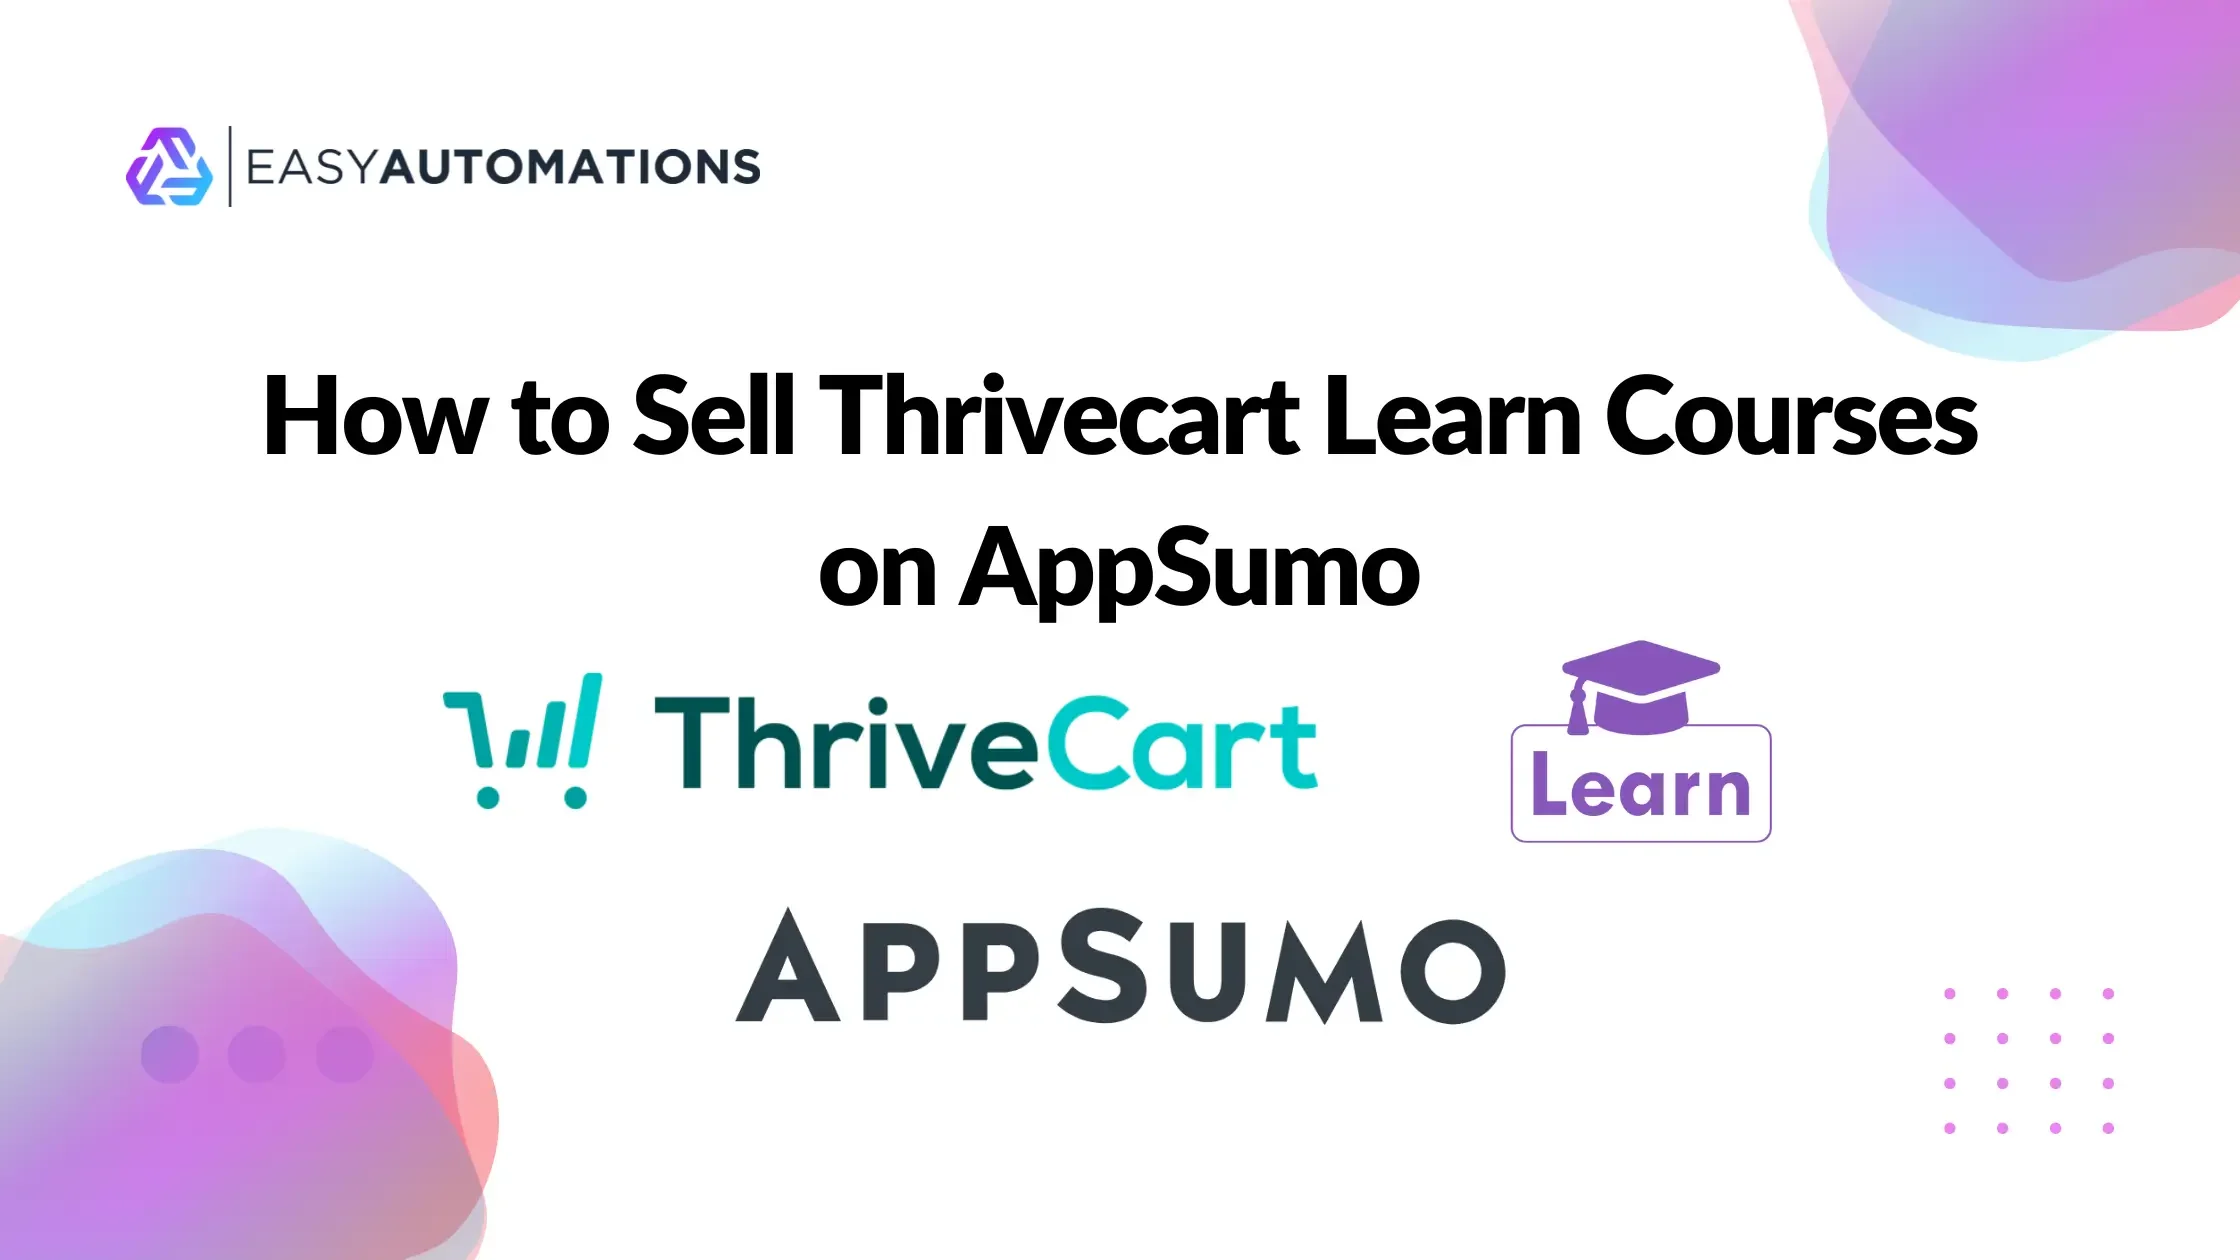 How to sell thrivecart learn courses on appsumo